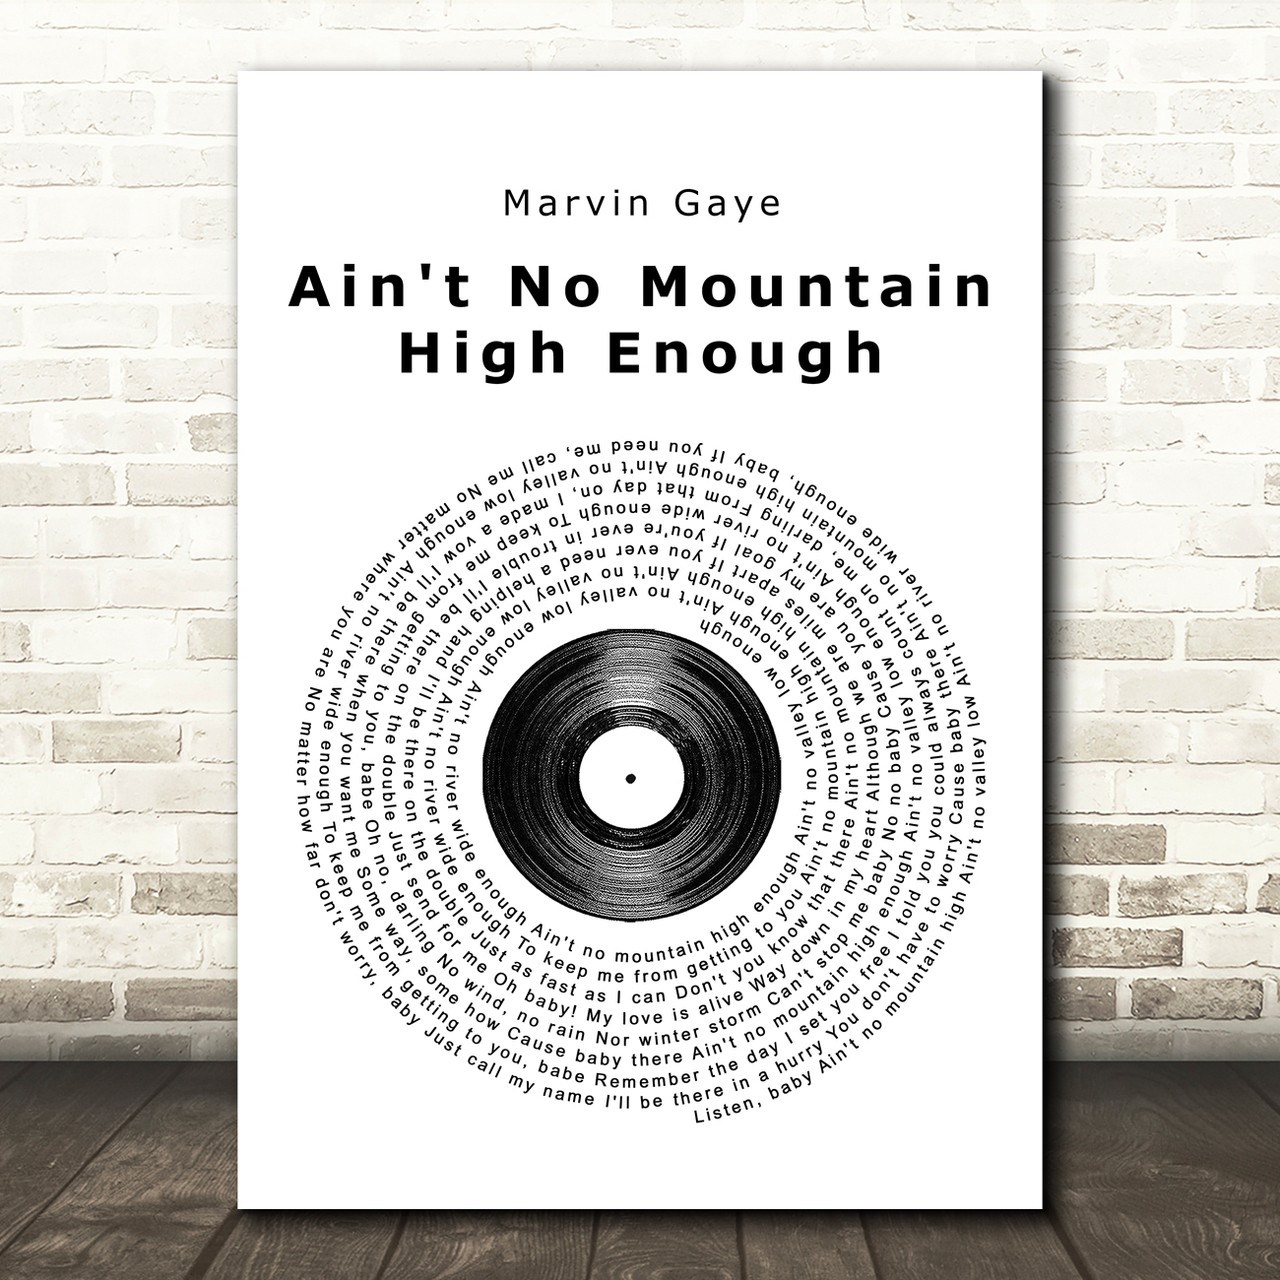 Marvin Gaye Ain't No Mountain High Enough Vinyl Record Song Lyric Quote Print